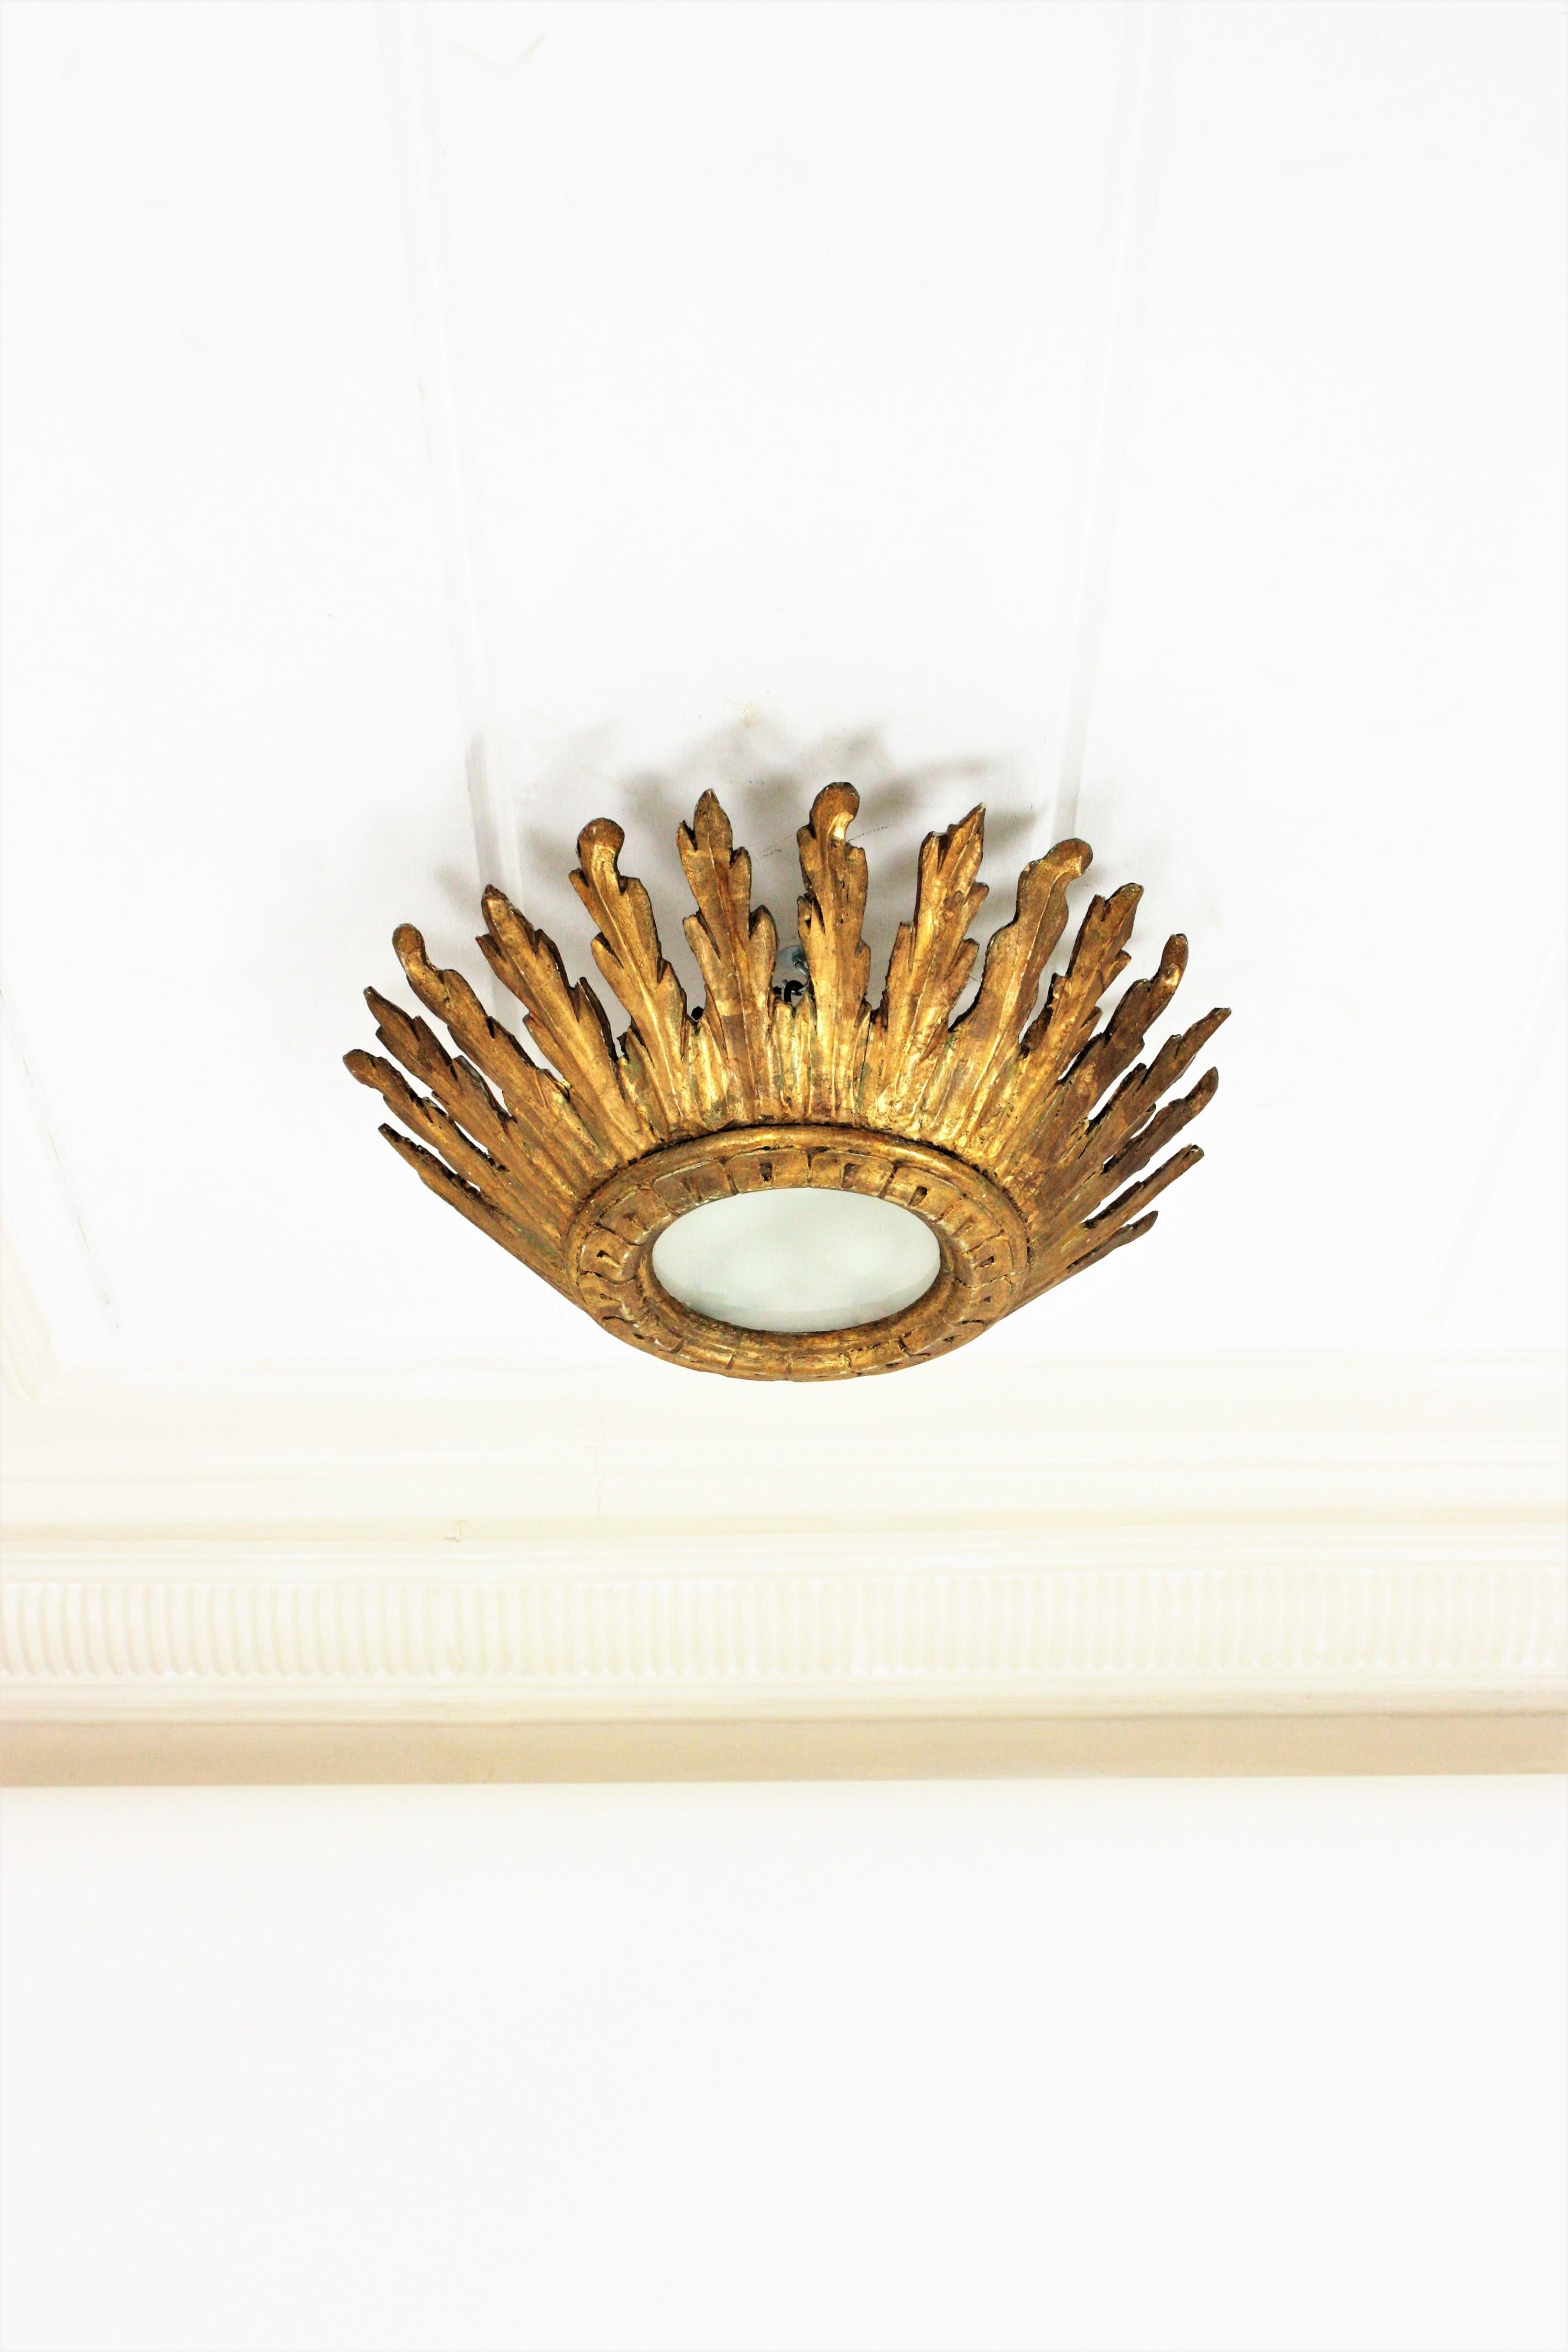 Sunburst Crown Ceiling Flush Mount Light Fixture in Giltwood, Spanish Baroque In Good Condition For Sale In Barcelona, ES